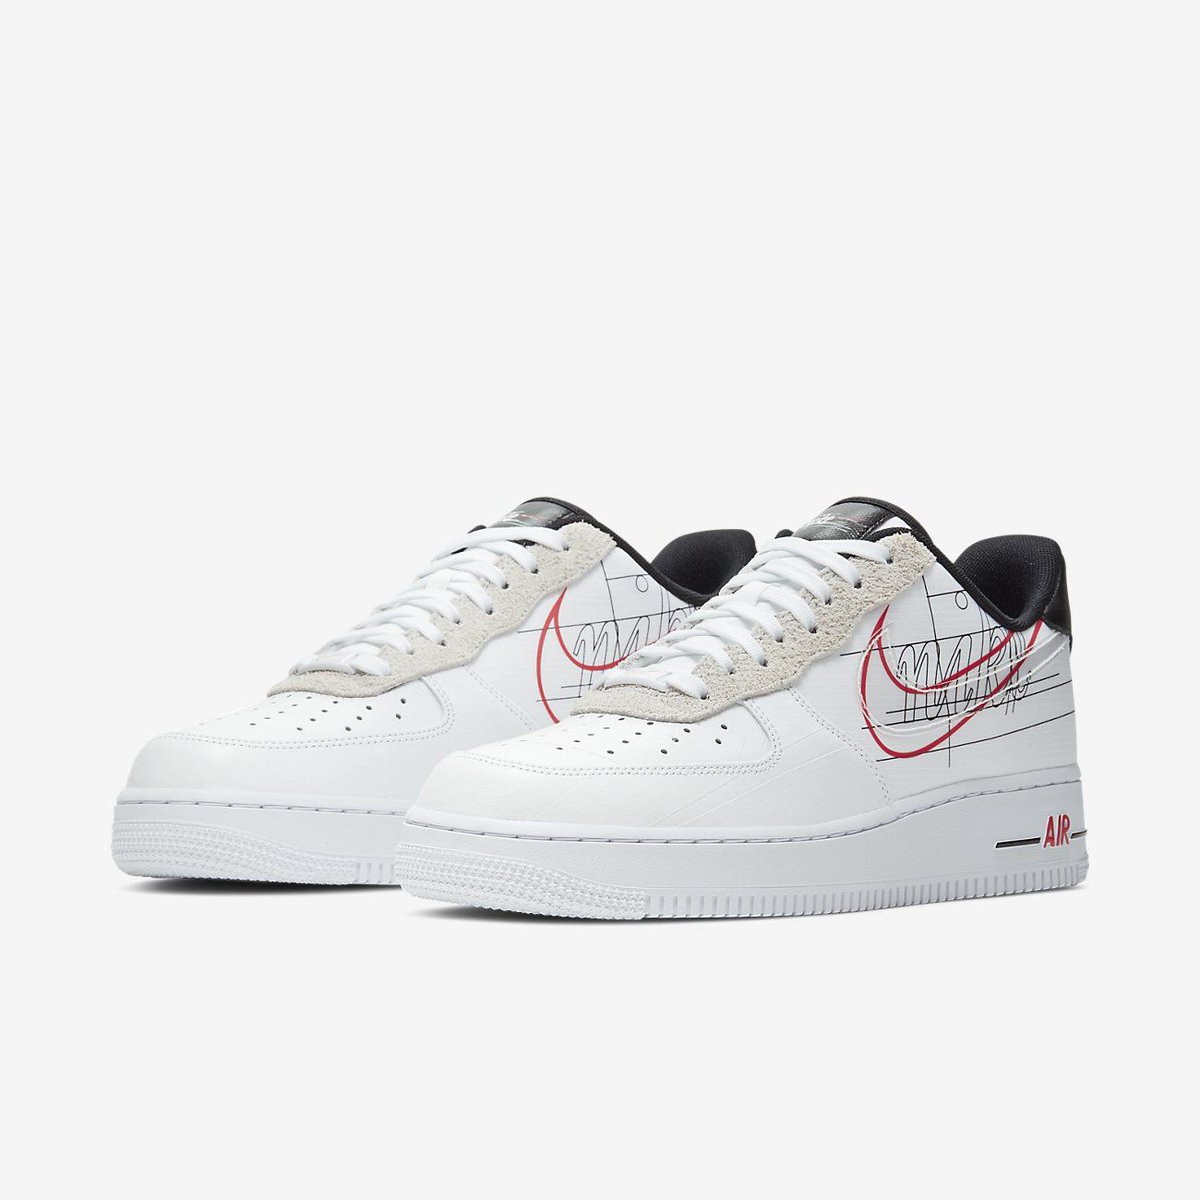 evolution of the swoosh air force 1